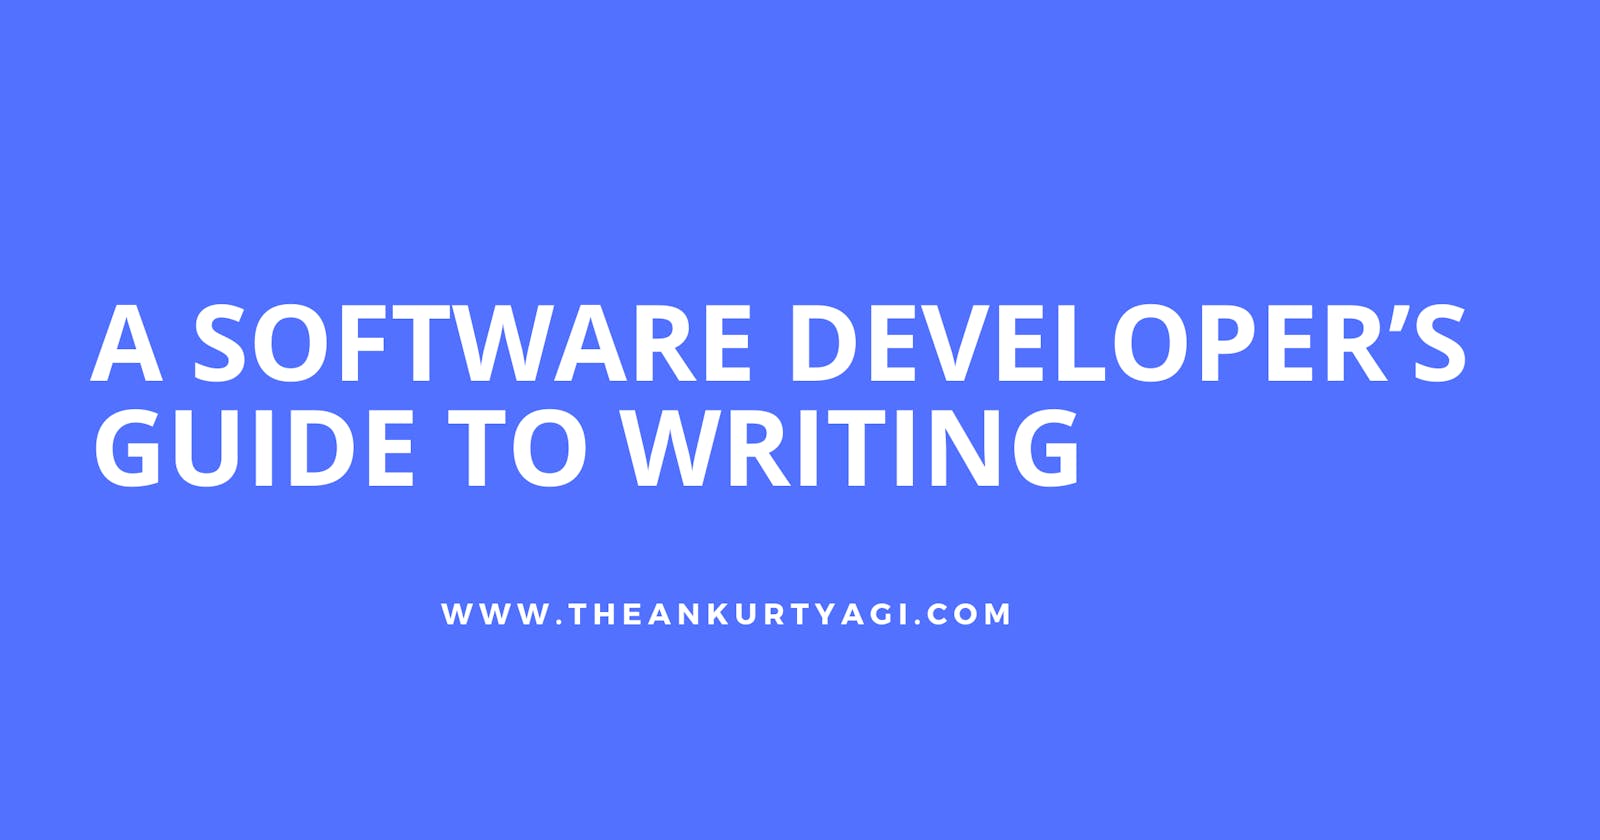 A Software Developer’s Guide to Writing